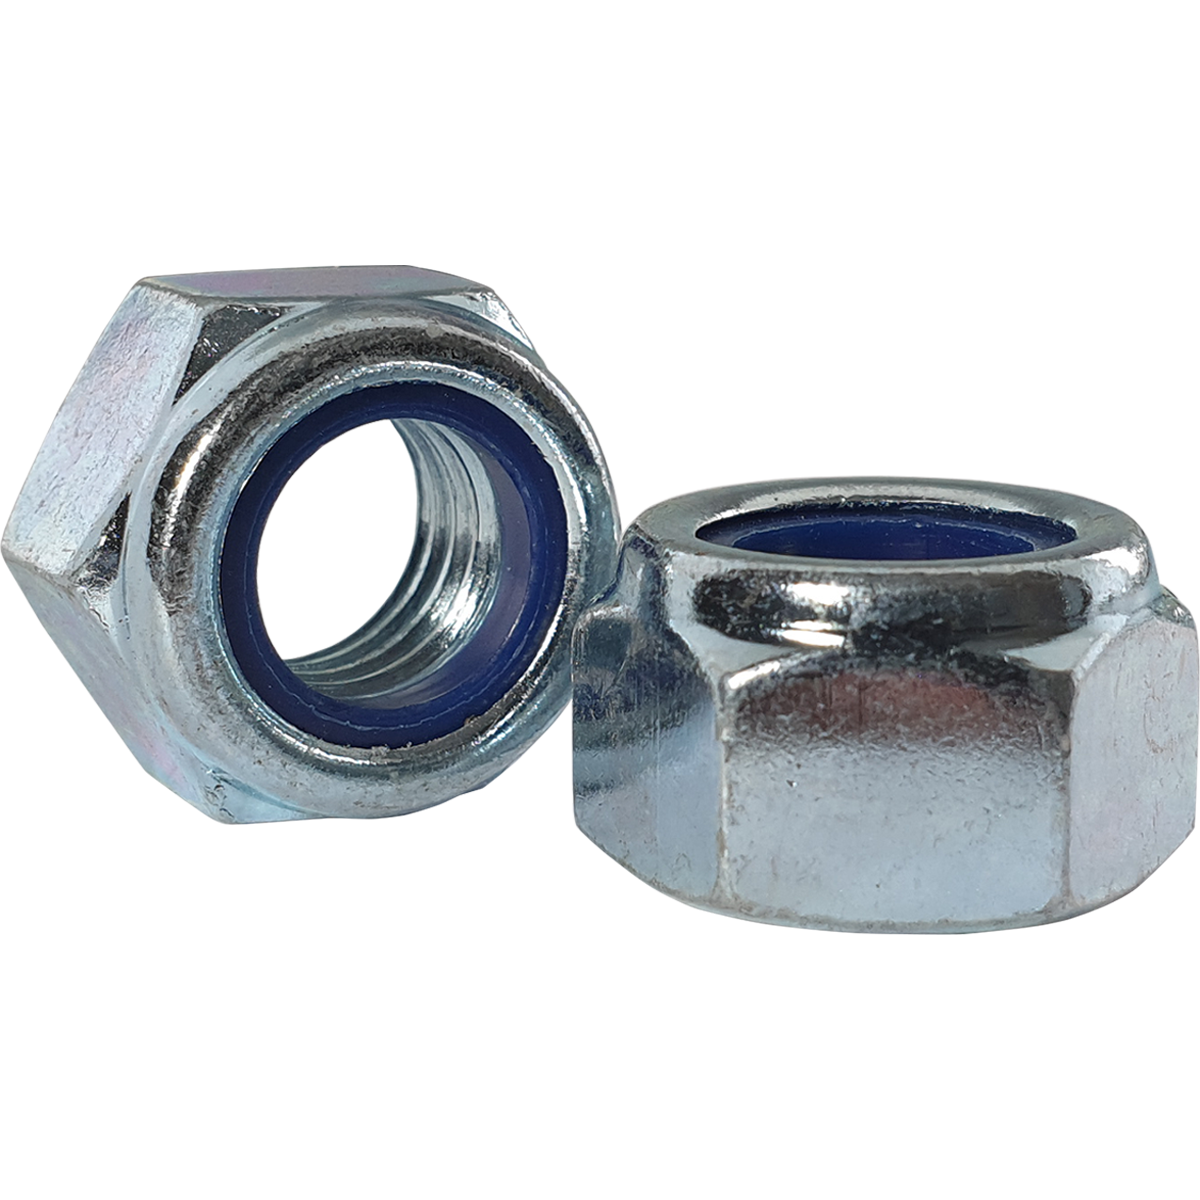  Nylon insert nuts, also known as Nyloc nuts or nylon insert lock nuts are available at competitive prices.